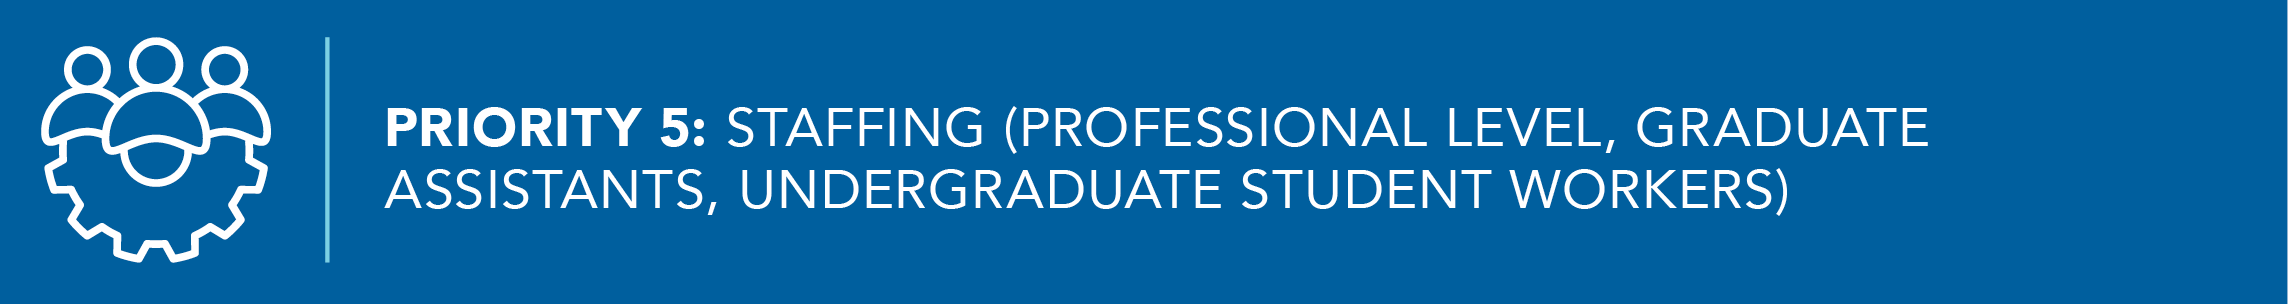 priority 5: Staffing (Professional Level, Graduate Assistants, Undergraduate Student Workers)